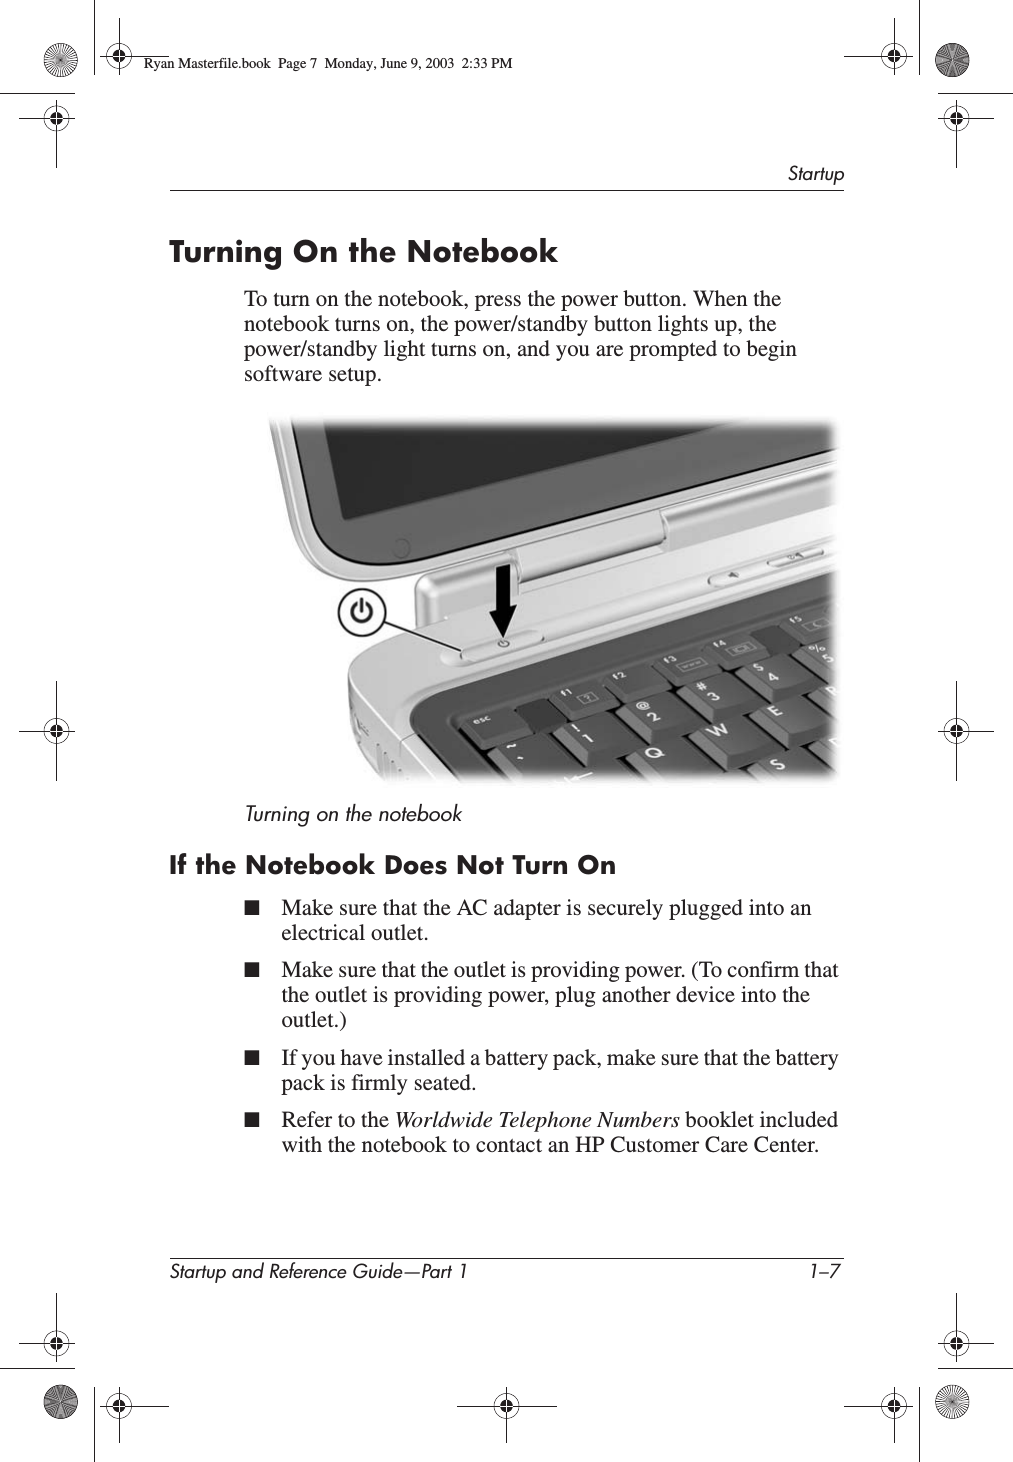 StartupStartup and Reference Guide—Part 1 1–7Turning On the NotebookTo turn on the notebook, press the power button. When the notebook turns on, the power/standby button lights up, the power/standby light turns on, and you are prompted to begin software setup.Turning on the notebookIf the Notebook Does Not Turn On■Make sure that the AC adapter is securely plugged into an electrical outlet.■Make sure that the outlet is providing power. (To confirm that the outlet is providing power, plug another device into the outlet.)■If you have installed a battery pack, make sure that the battery pack is firmly seated.■Refer to the Worldwide Telephone Numbers booklet included with the notebook to contact an HP Customer Care Center.Ryan Masterfile.book  Page 7  Monday, June 9, 2003  2:33 PM